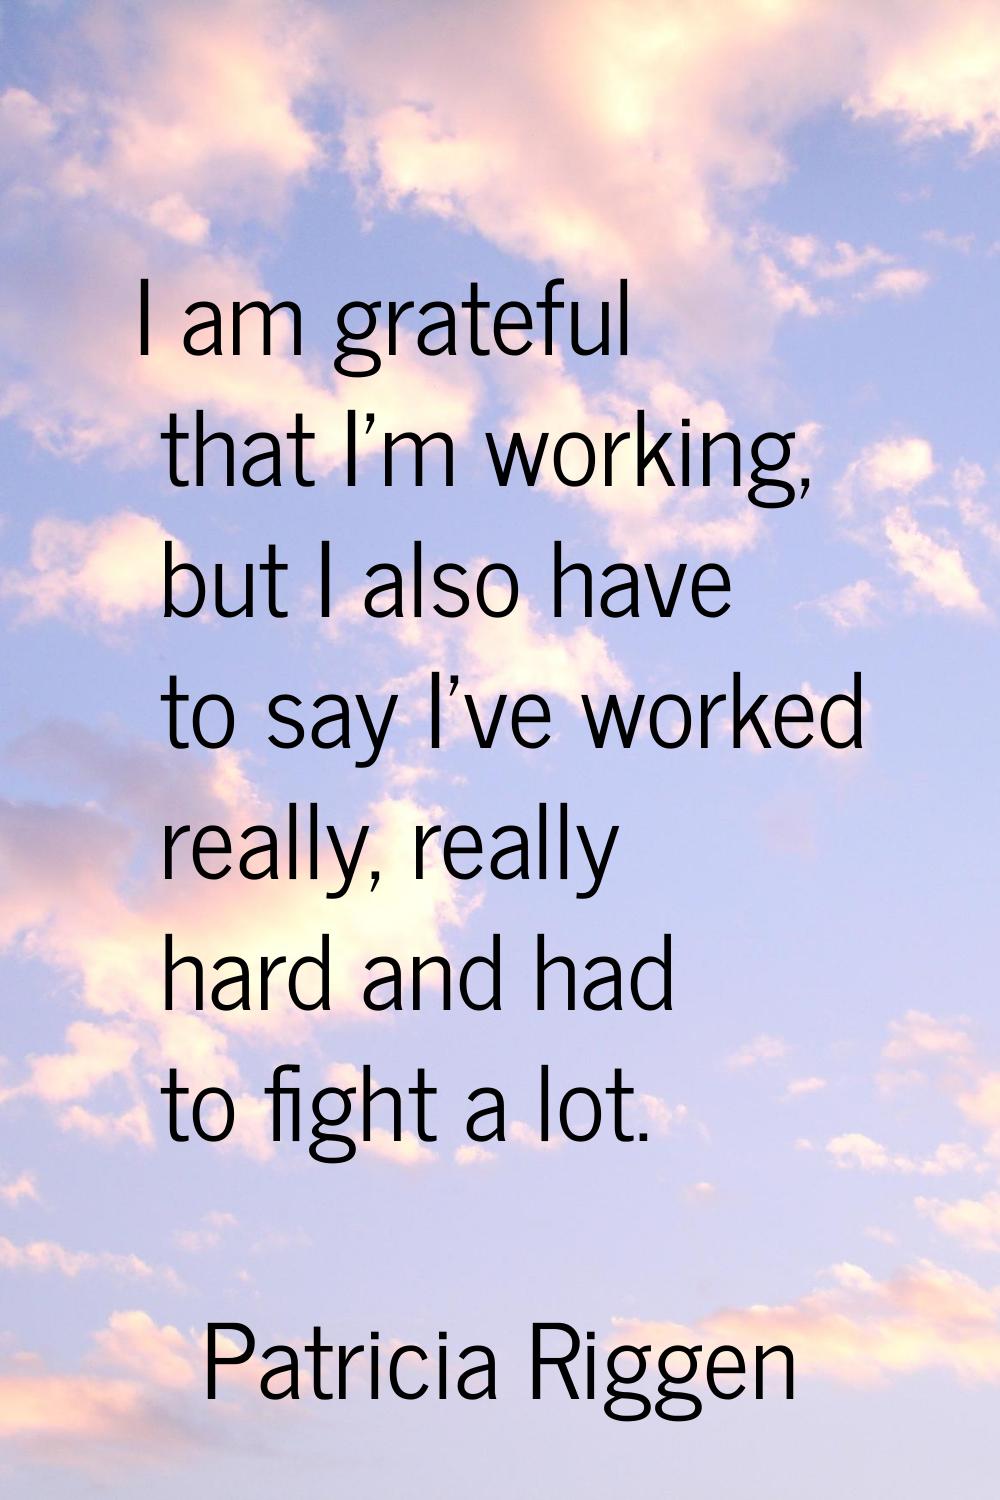 I am grateful that I'm working, but I also have to say I've worked really, really hard and had to f